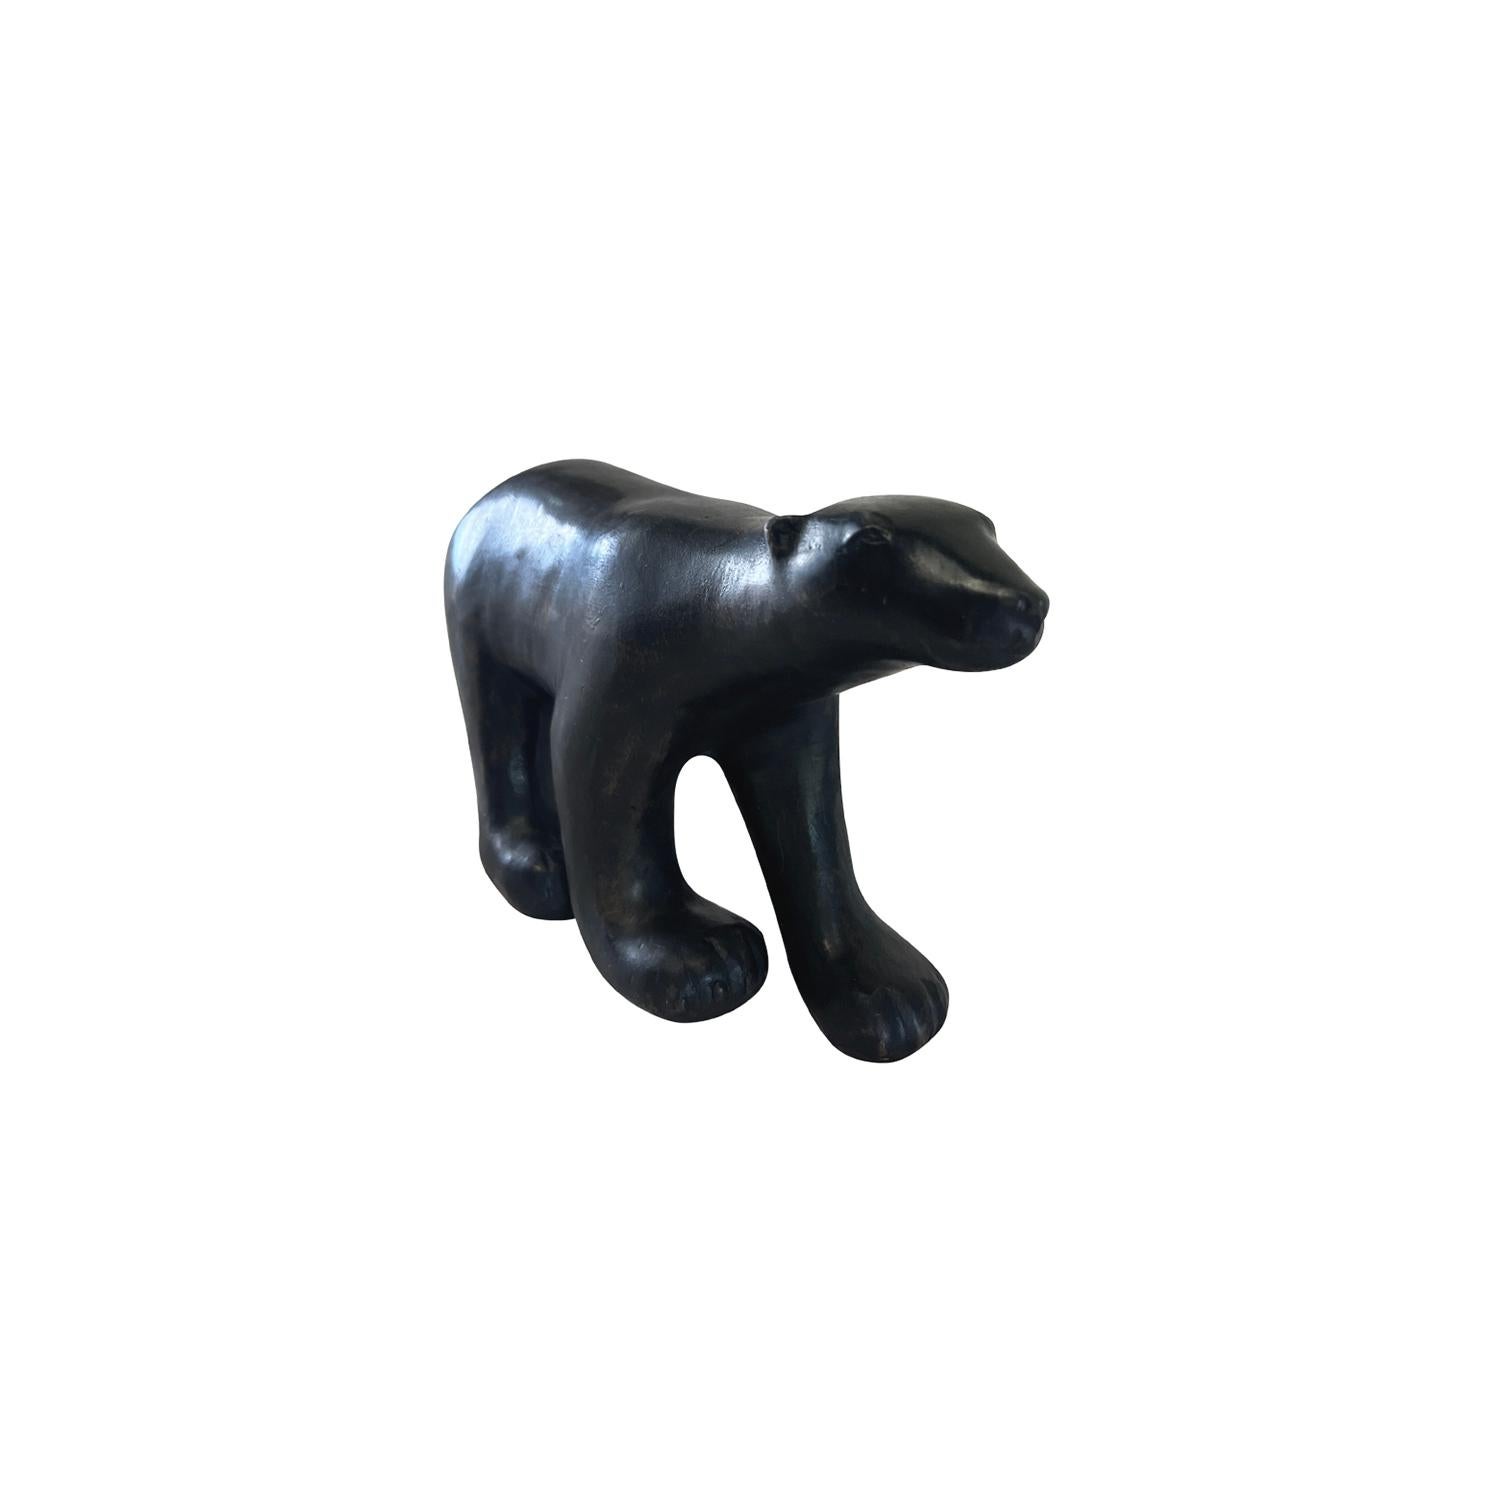 Hand-Crafted 20th Century French Bronze Polar Bear Sculpture - Vintage Décor by Pierre Chenet For Sale